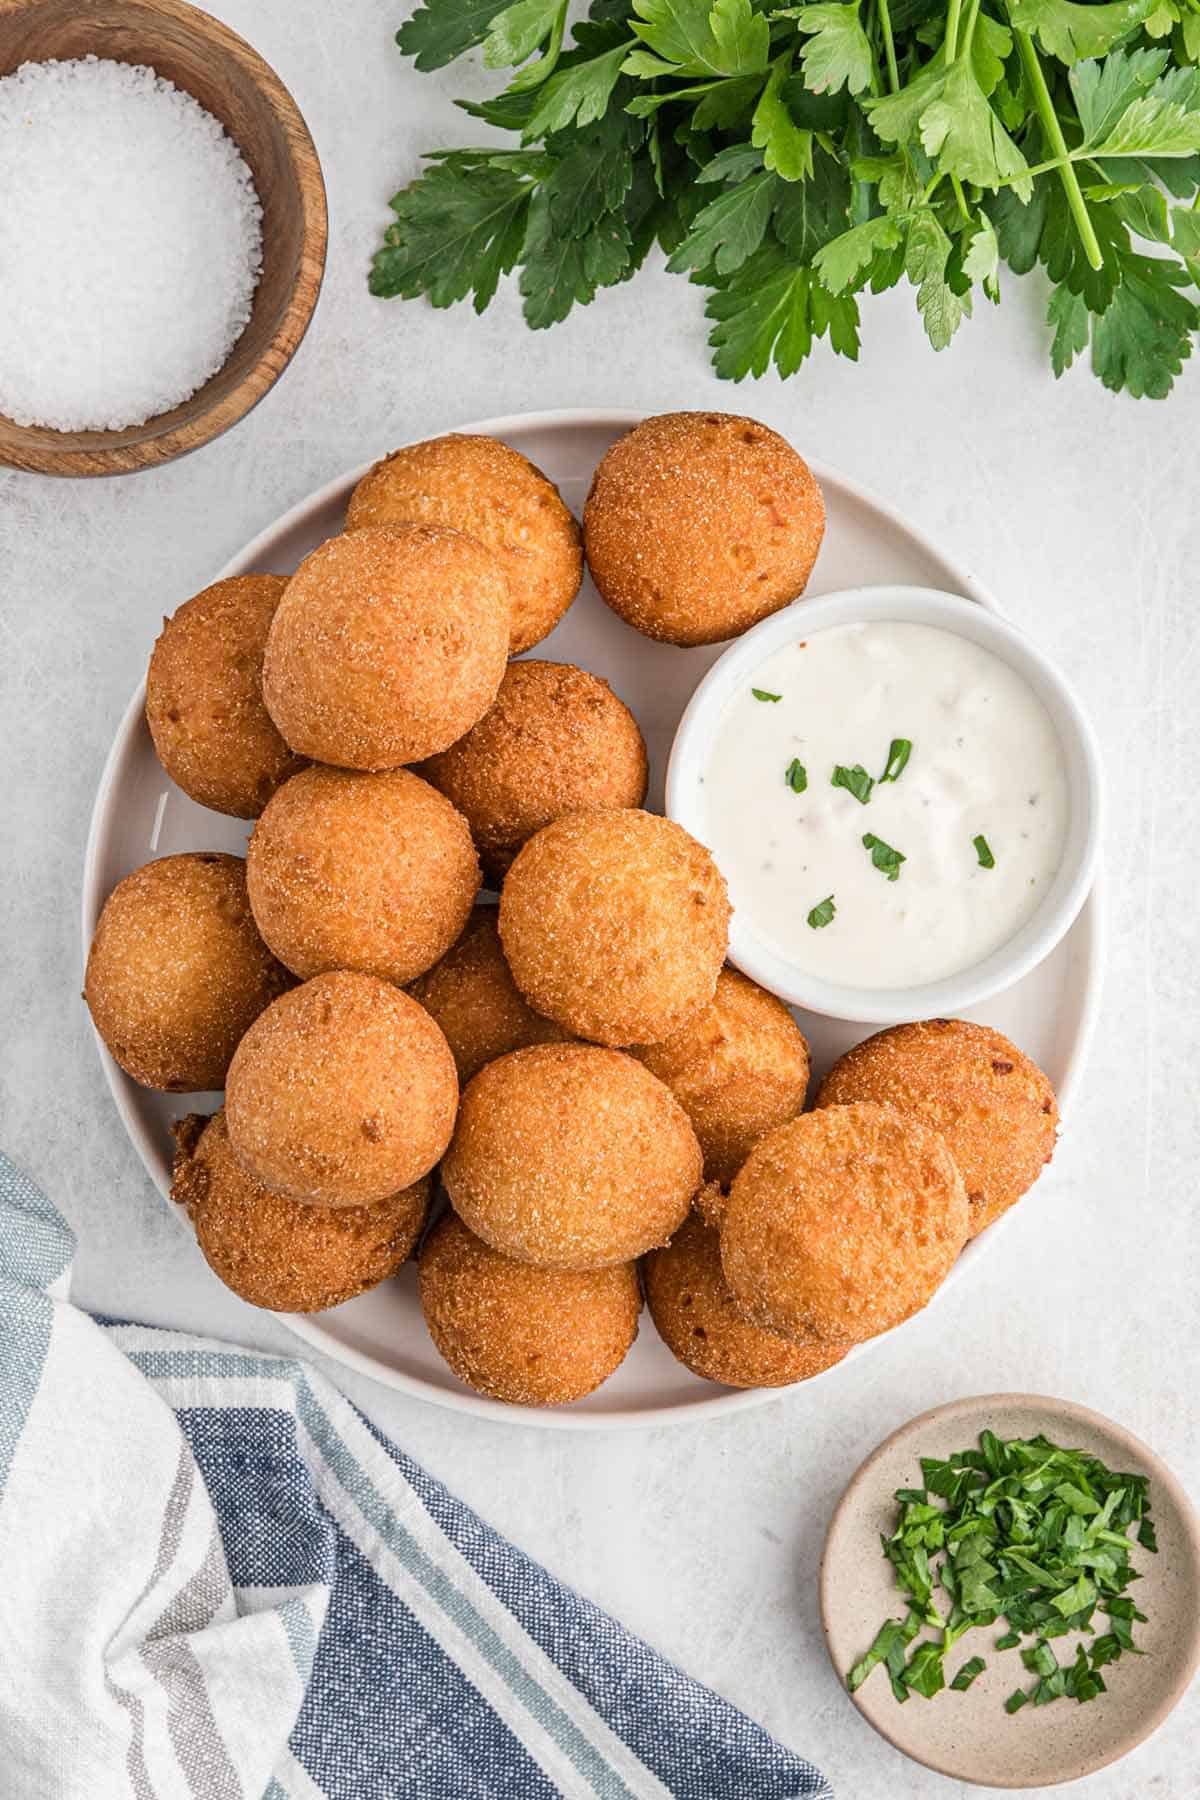 Fried hush puppies spilling out of bowl